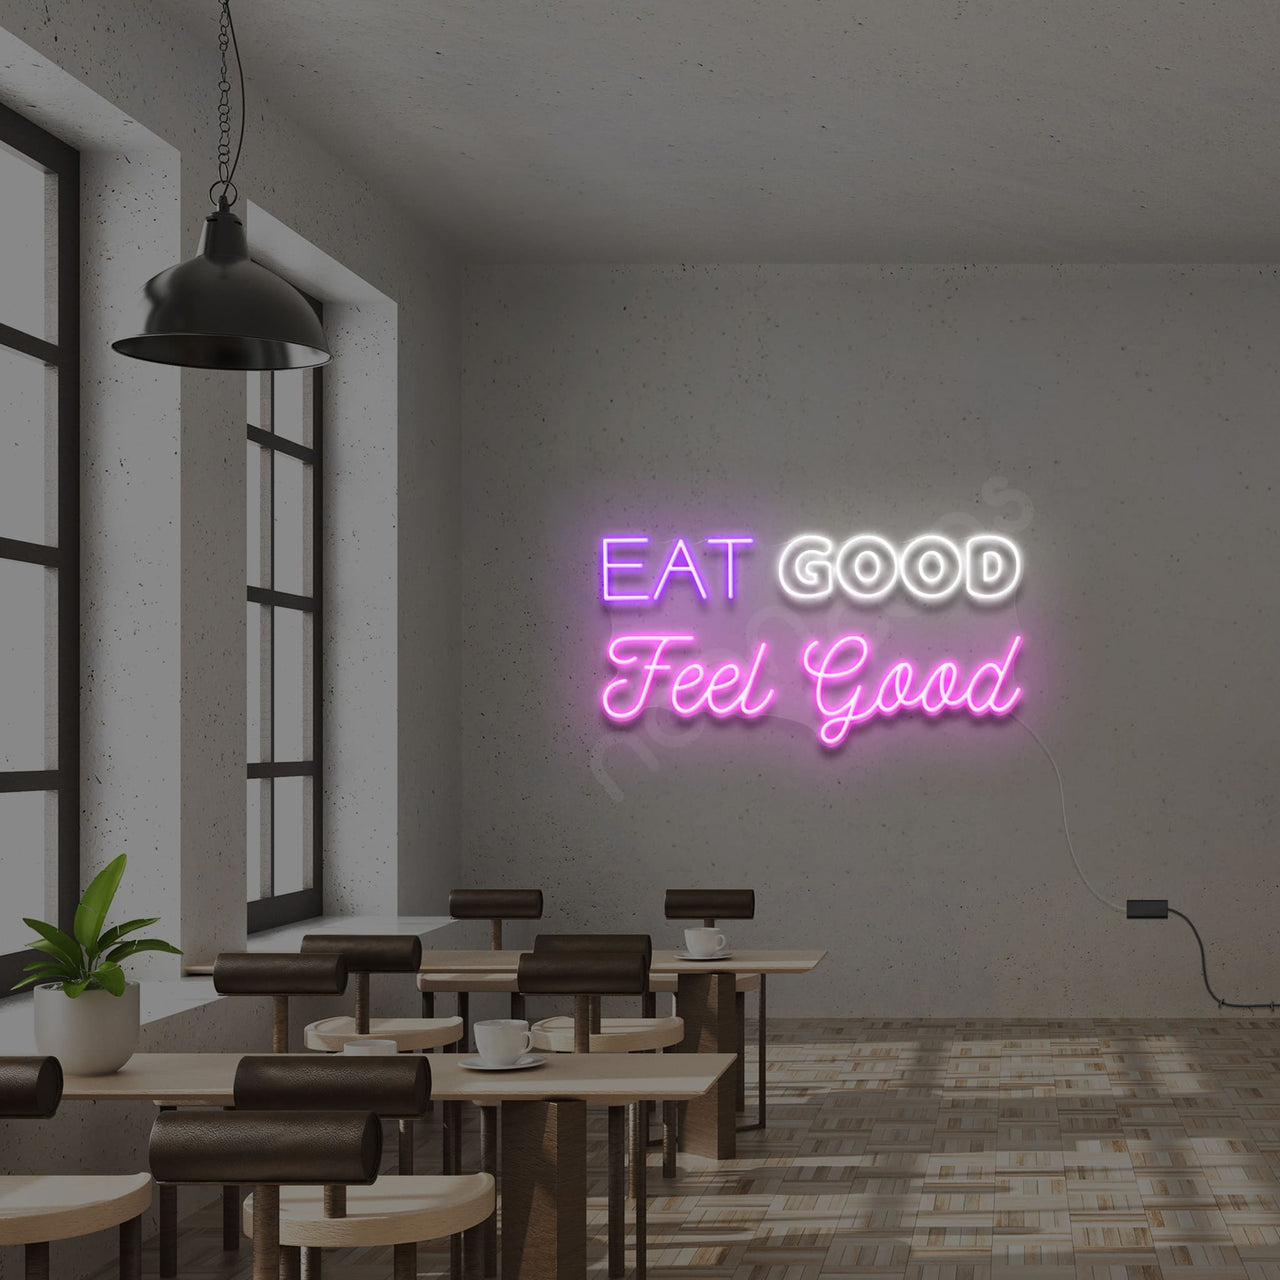 "Eat Good Feel Good" Neon Sign by Neon Icons